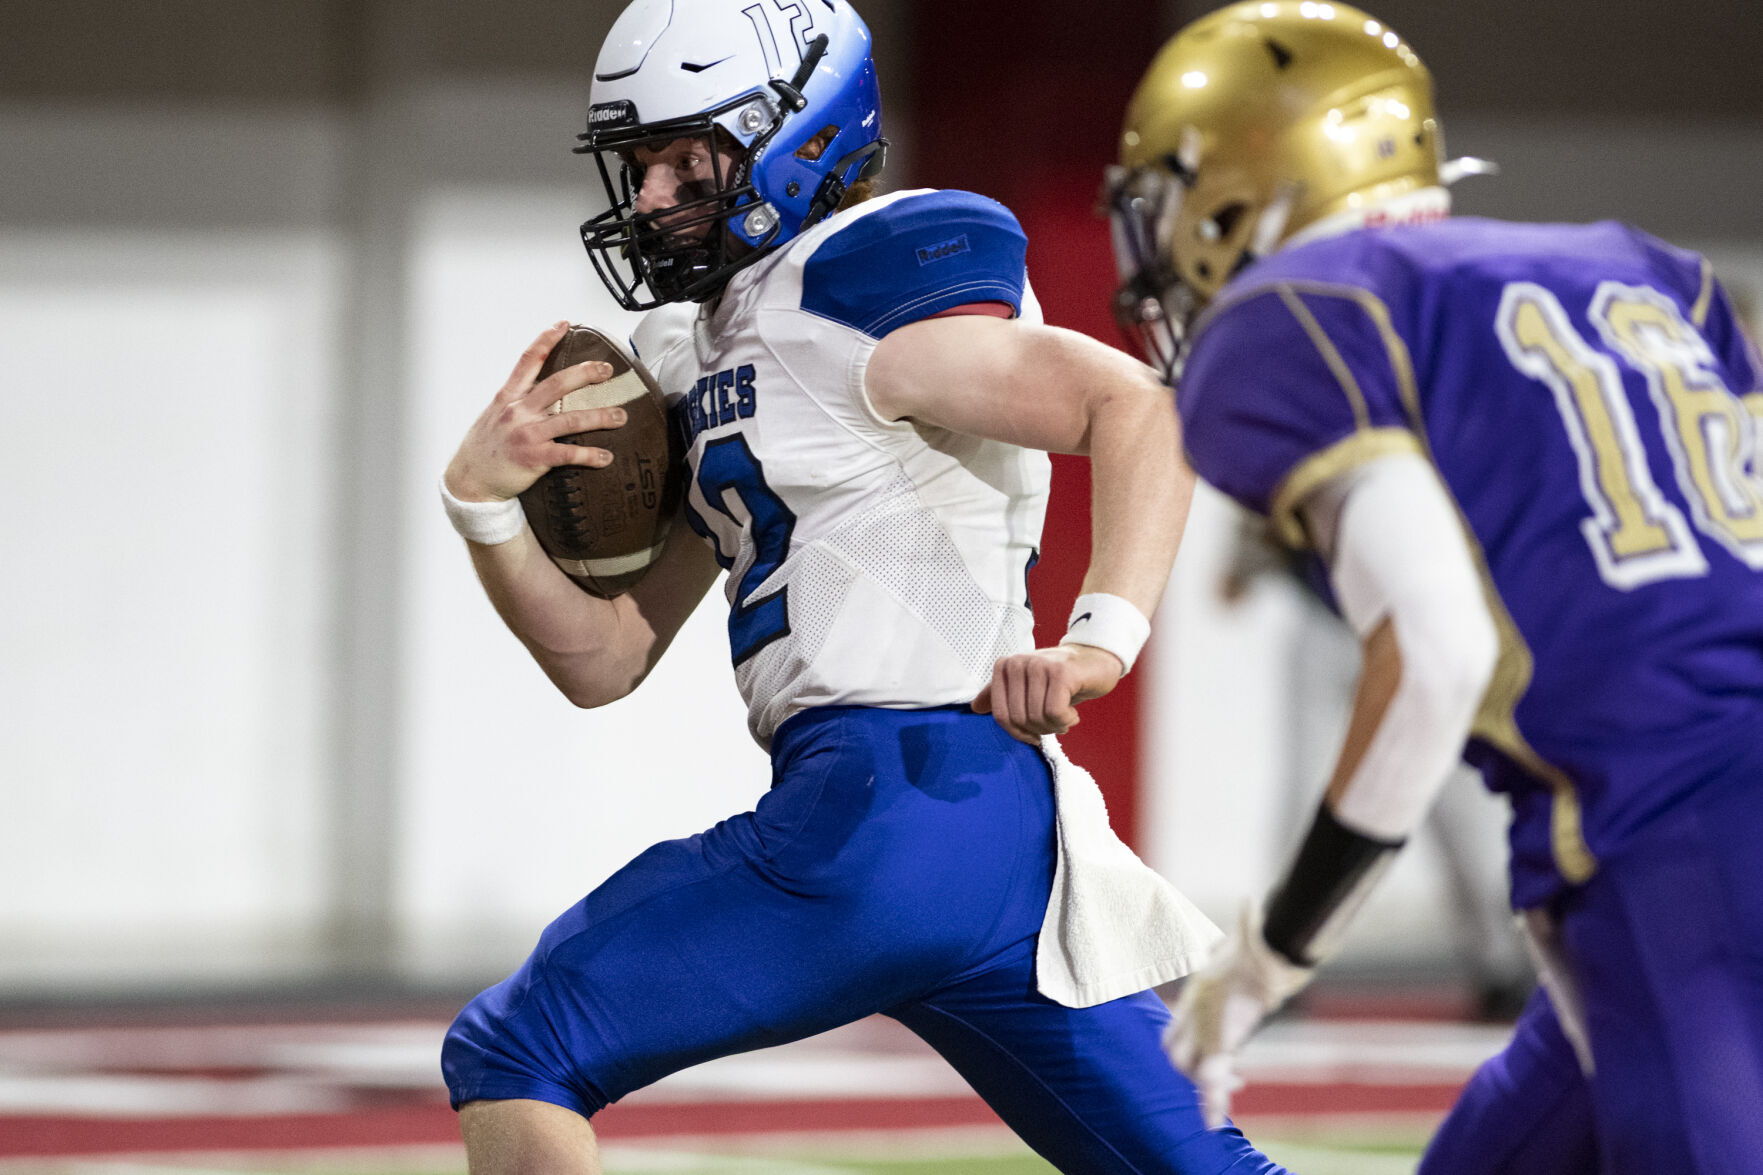 PHOTOS: 2022 SDHSAA 11B football state championship with Elk Point